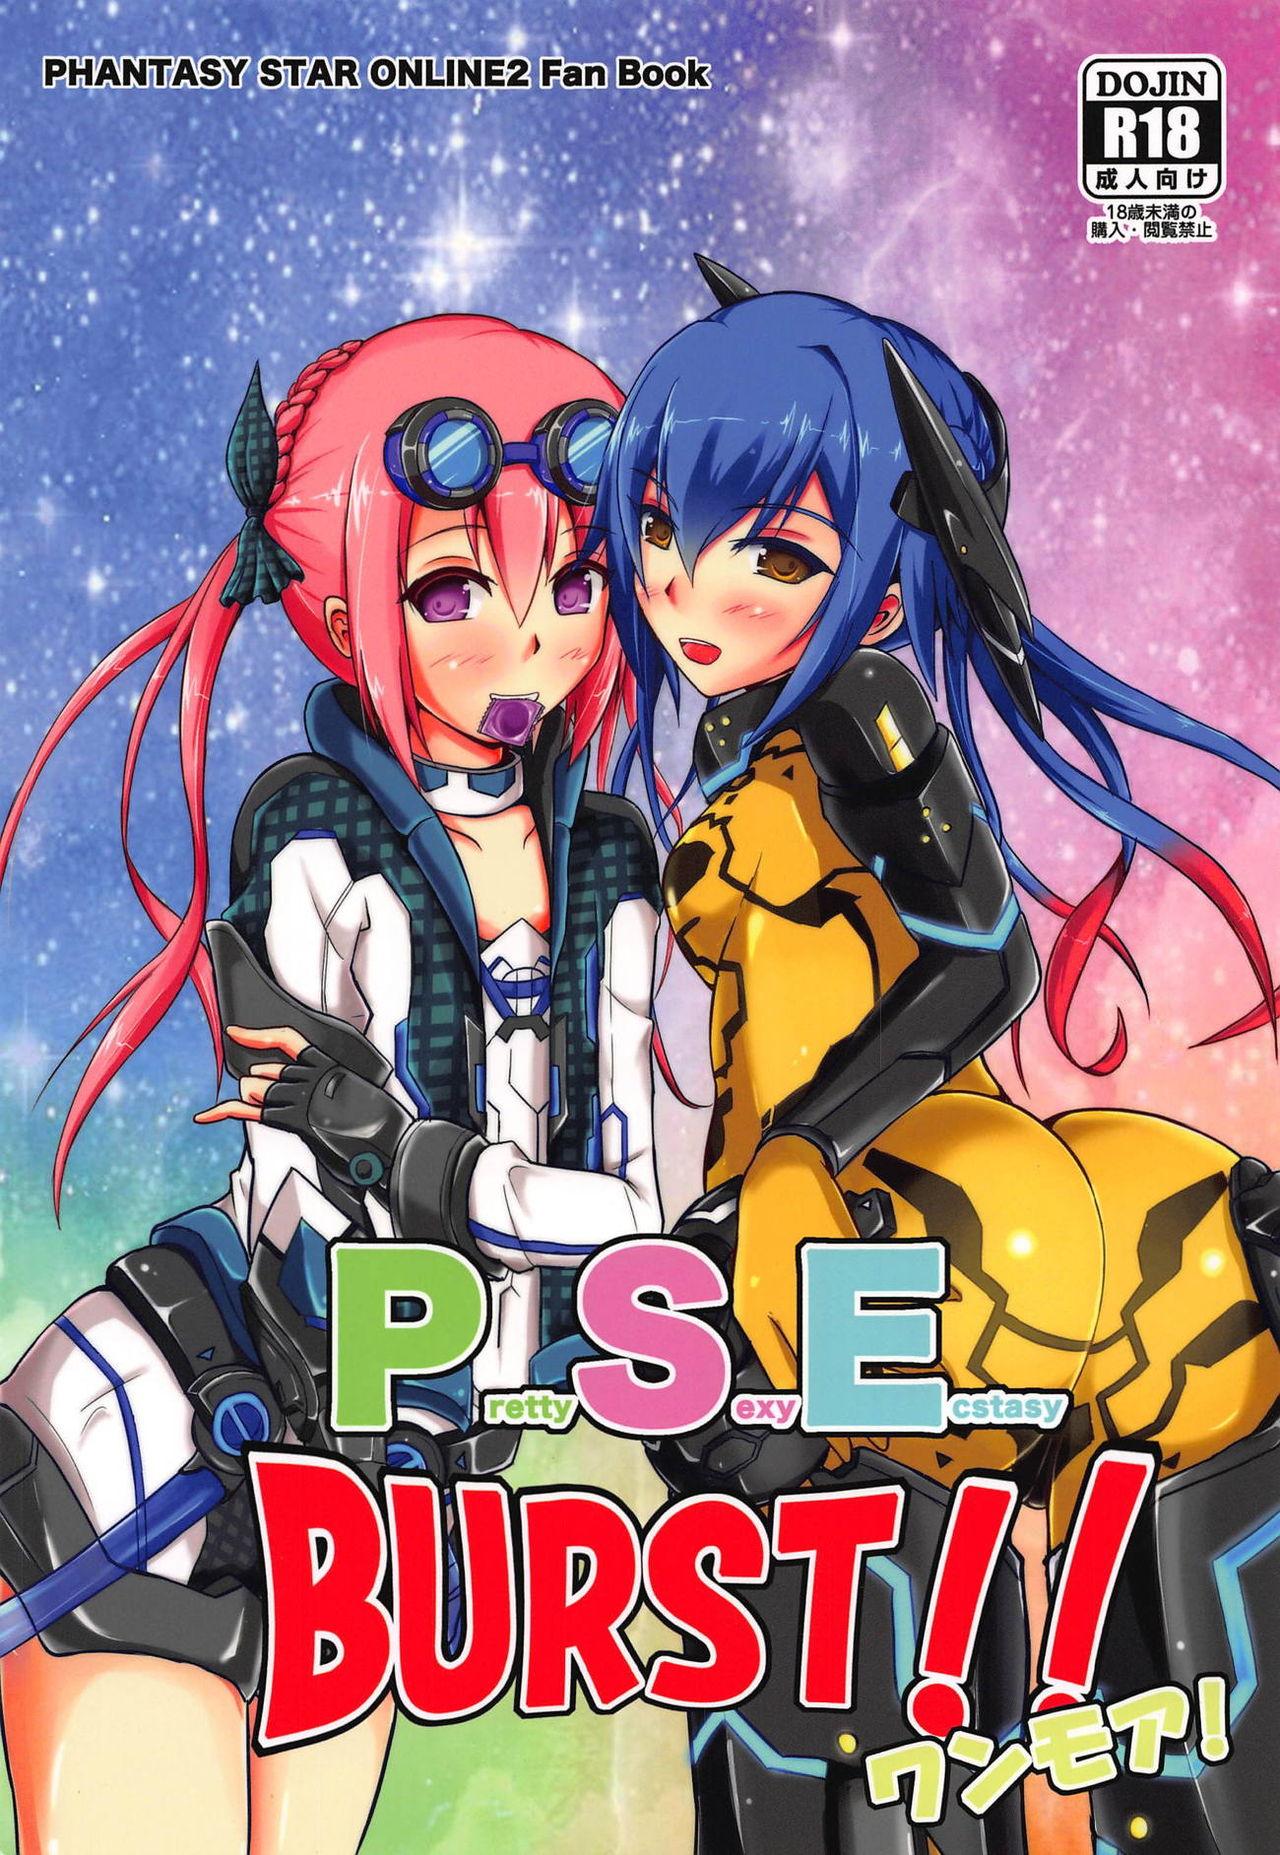 Bigtits Pretty Sexy Ecstasy BURST!! One More! - Phantasy star online 2 Gay Gangbang - Picture 1